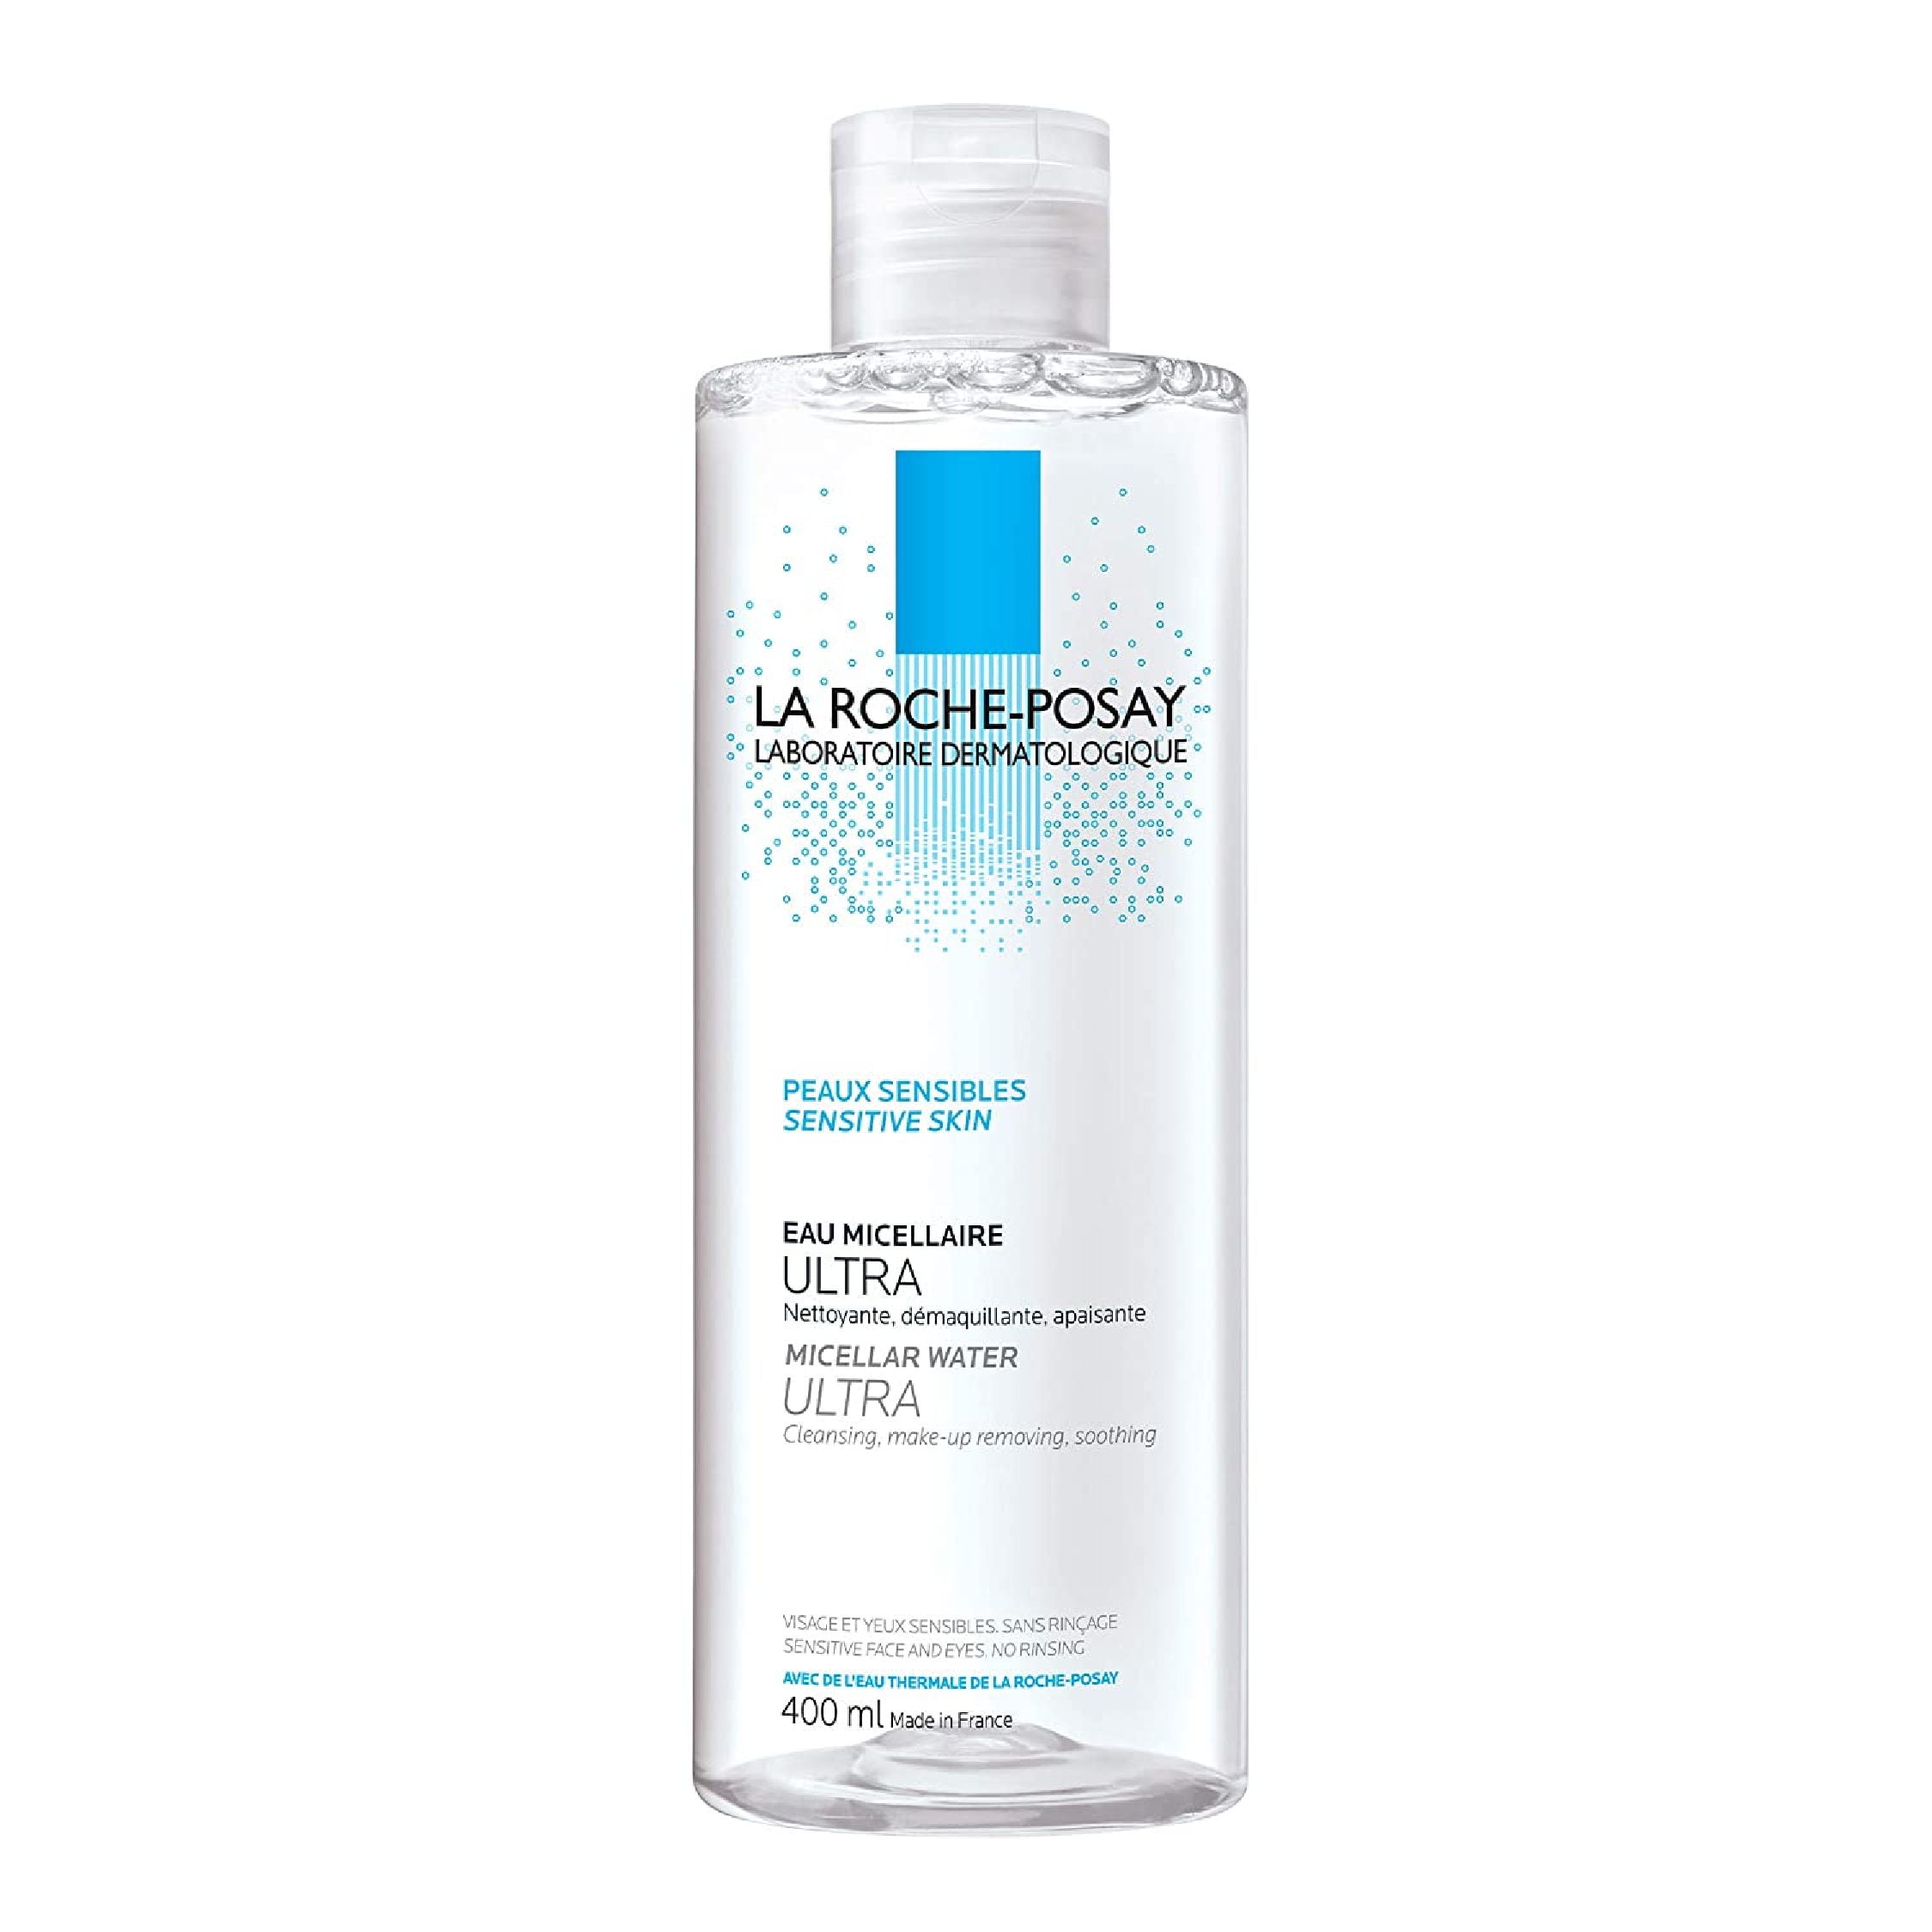 La Roche Posay Micellaire Ultra up Cleansing Water for Sensitive Skin 13.5 fl - Walmart.com